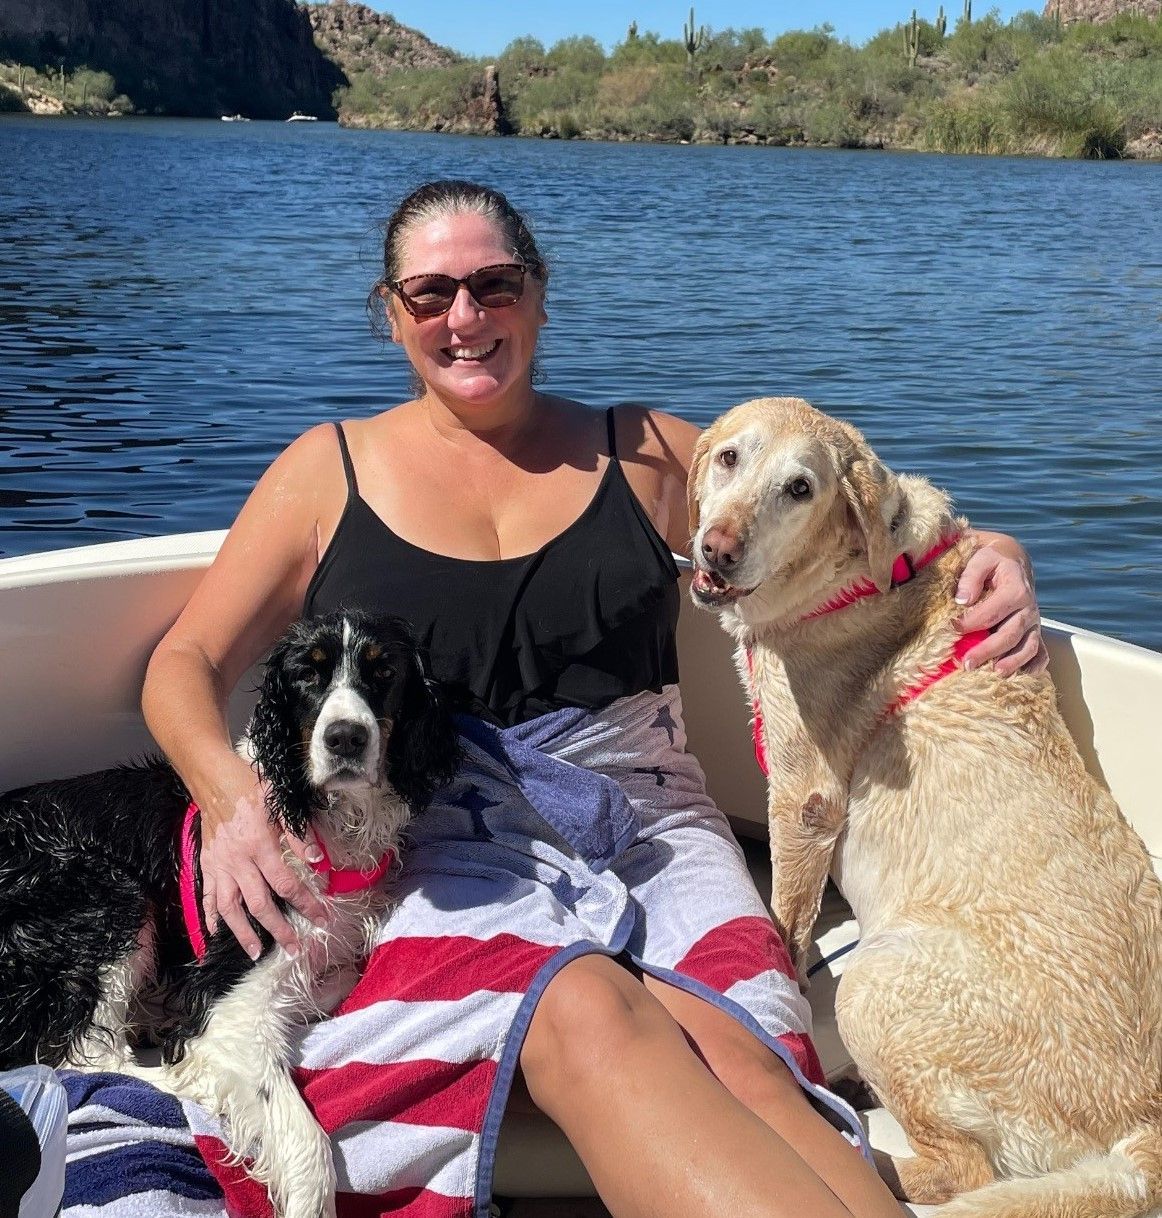 A woman is sitting on a boat with two dogs